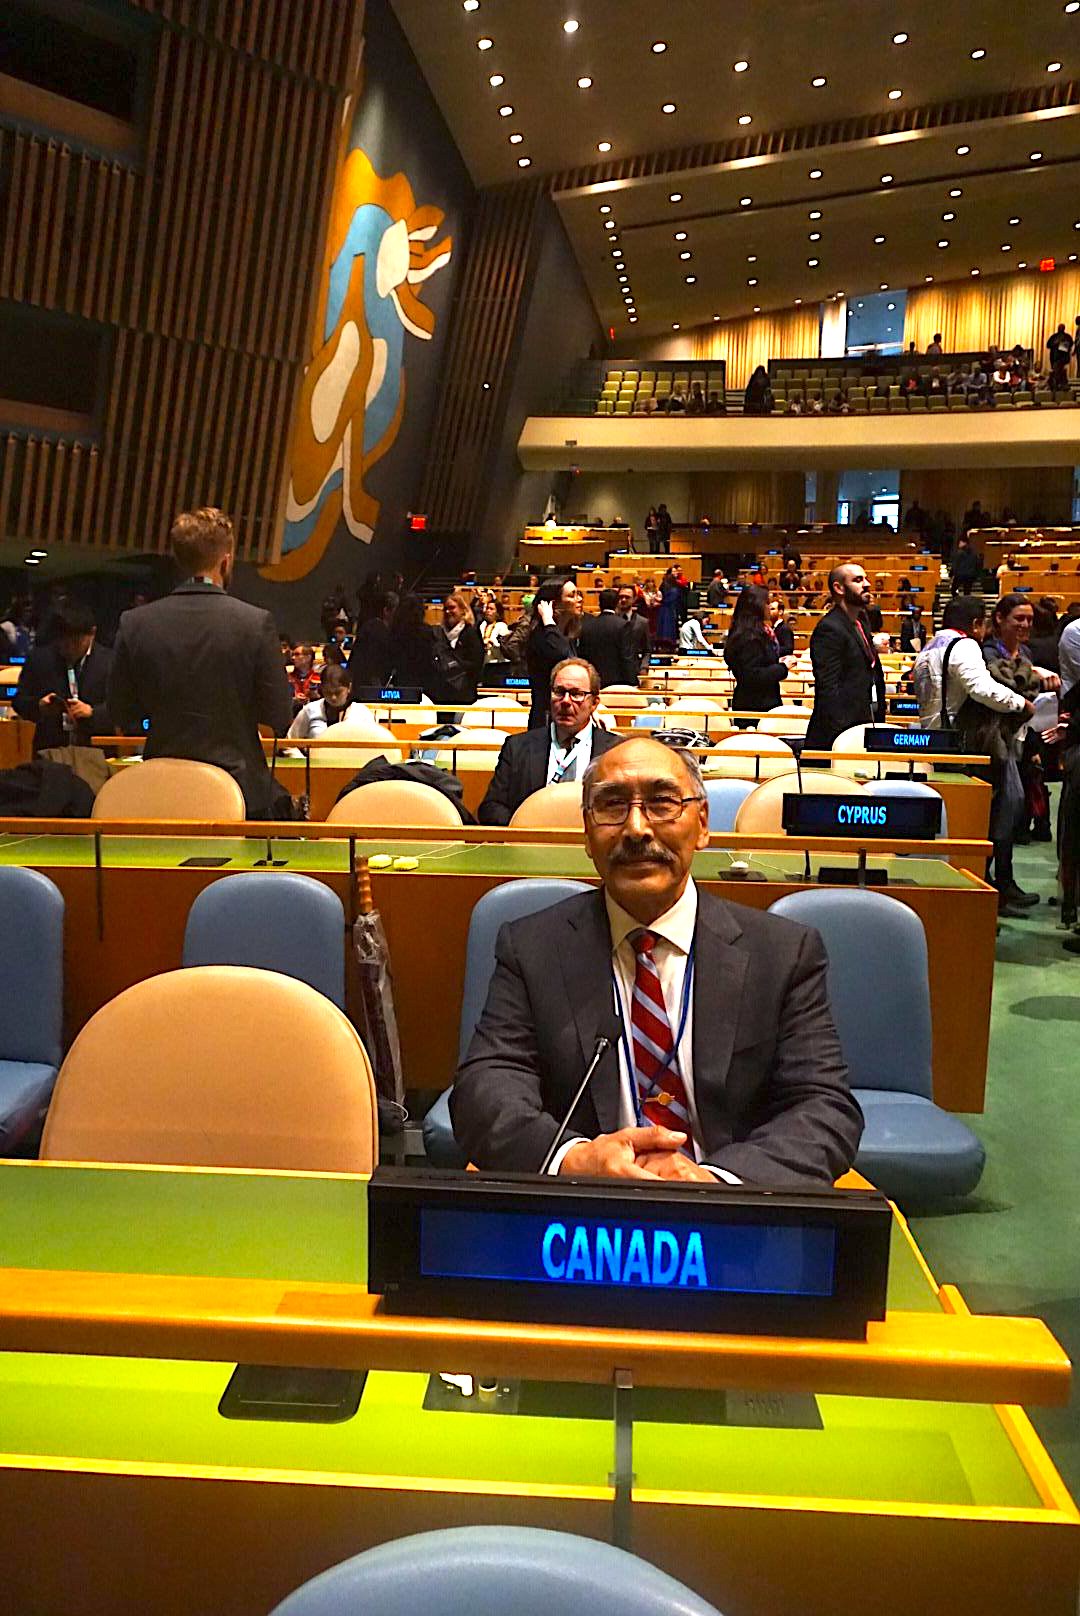 Nunavut Premier Paul Quassa sits April 16 on the floor of the general assembly of the UN where he is a member of the official Canadian delegation to the UN Permanent Forum on Indigenous Issues. As a member of the official delegation, he will be able to participate in the Canadian government's official positions during the two-week meeting. (PHOTO COURTESY OF PAUL QUASSA)